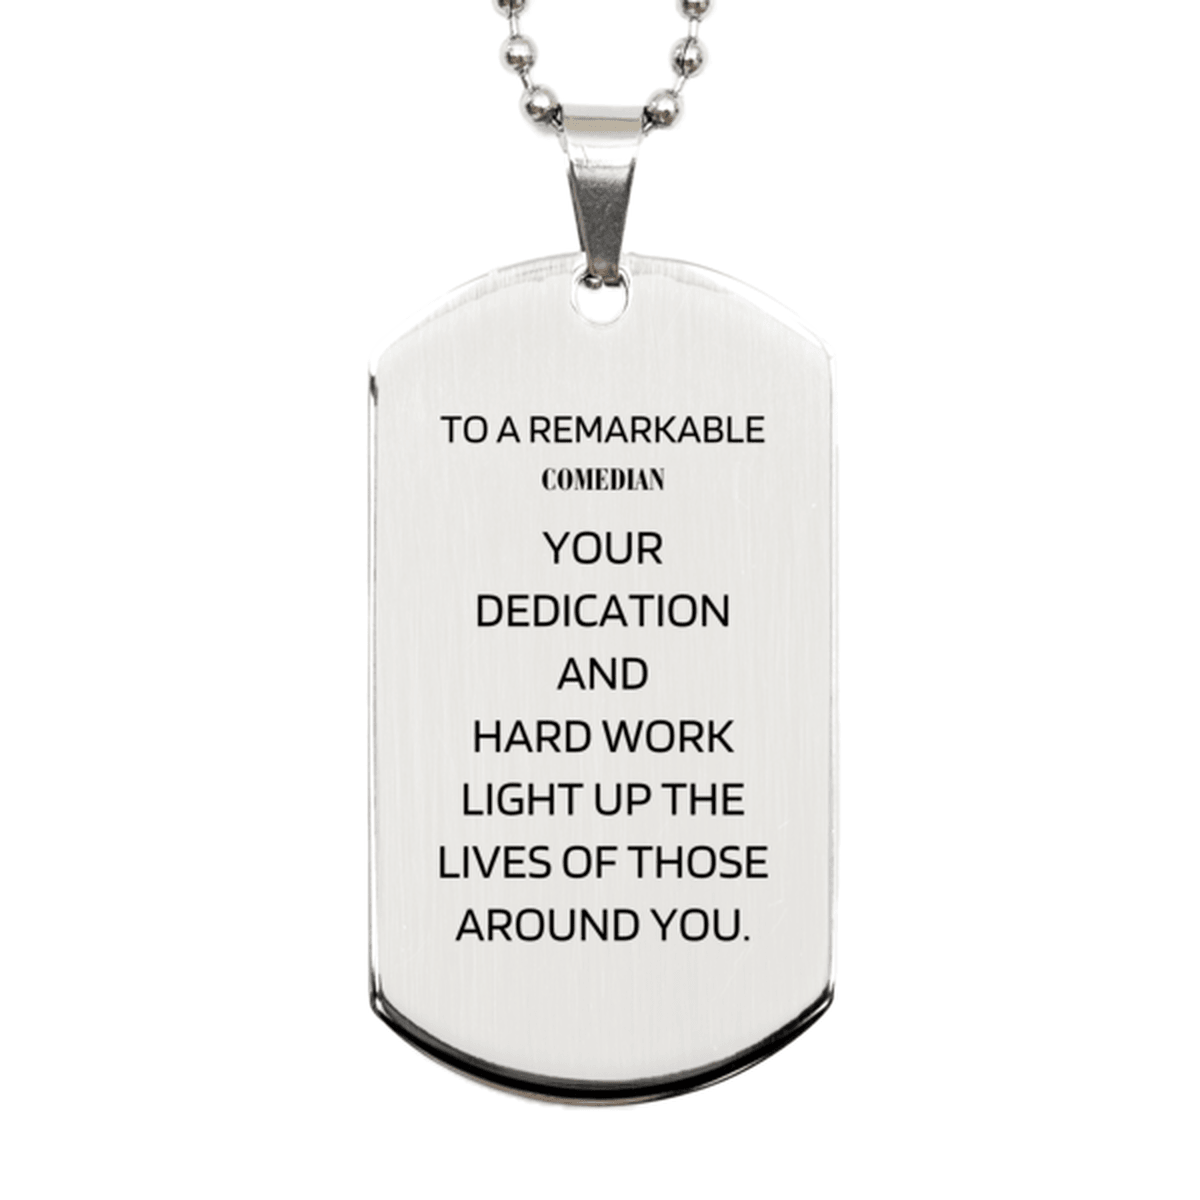 Remarkable Comedian Gifts, Your dedication and hard work, Inspirational Birthday Christmas Unique Silver Dog Tag For Comedian, Coworkers, Men, Women, Friends - Mallard Moon Gift Shop